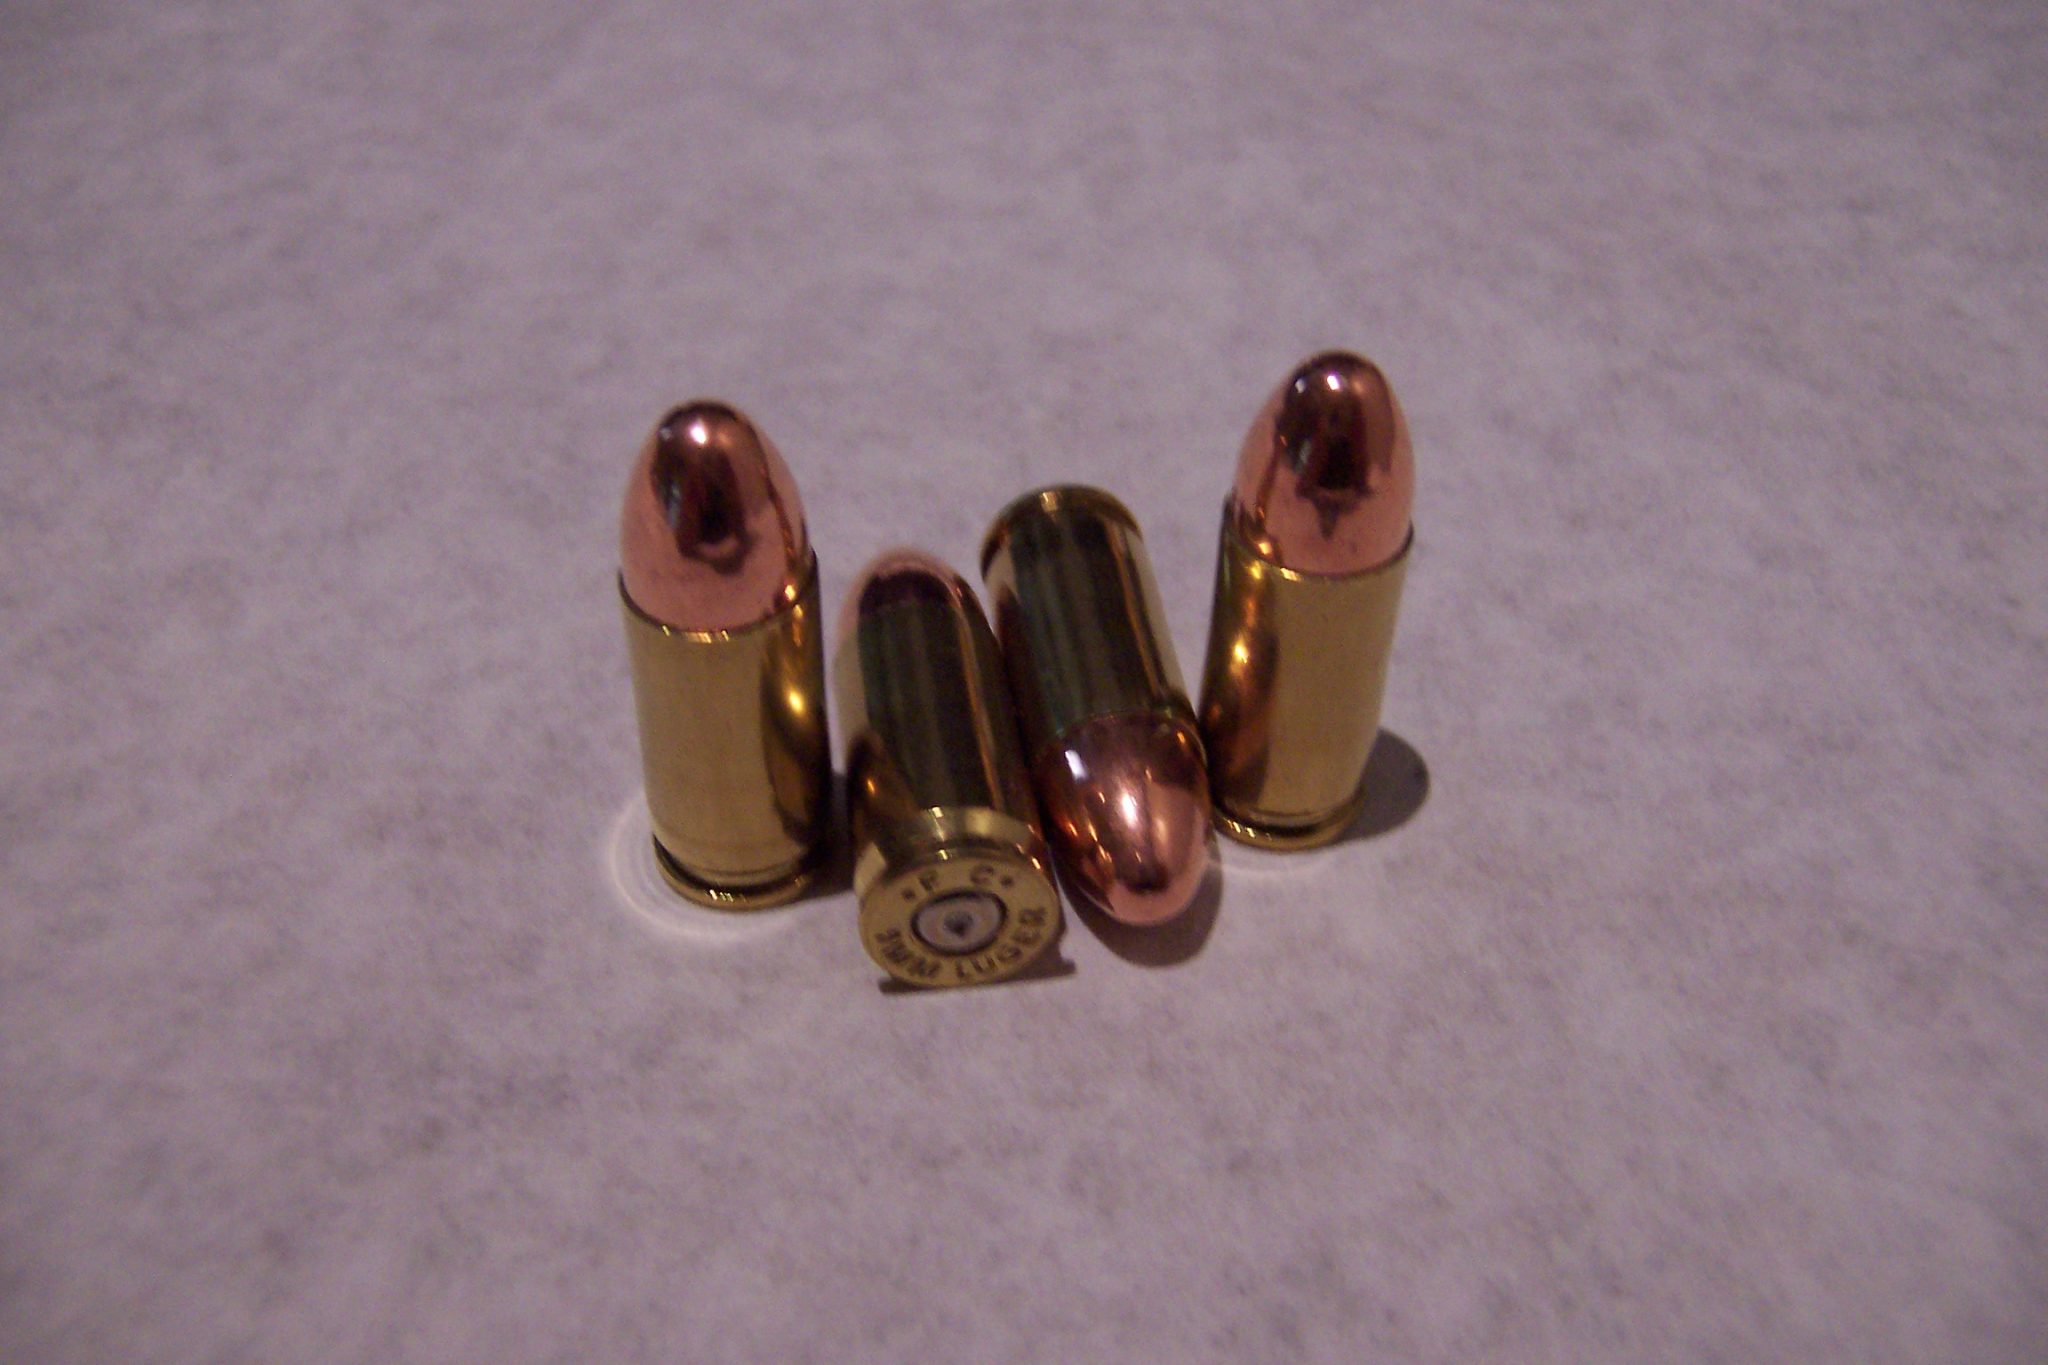 9mm-dummy-rounds-25-rounds-the-perfect-shot